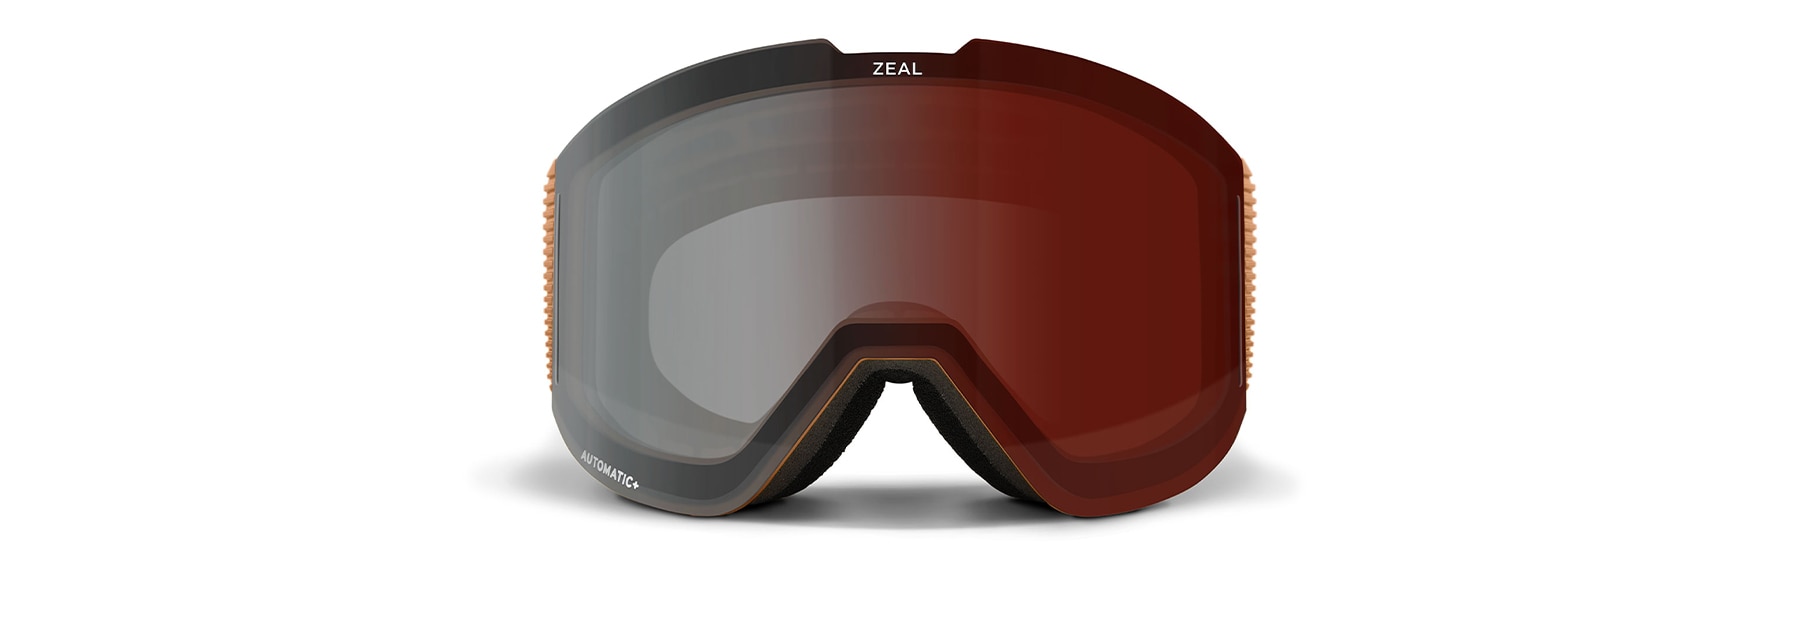 Shop LOOKOUT (Z1867) Goggles by Zeal | Zeal Optics